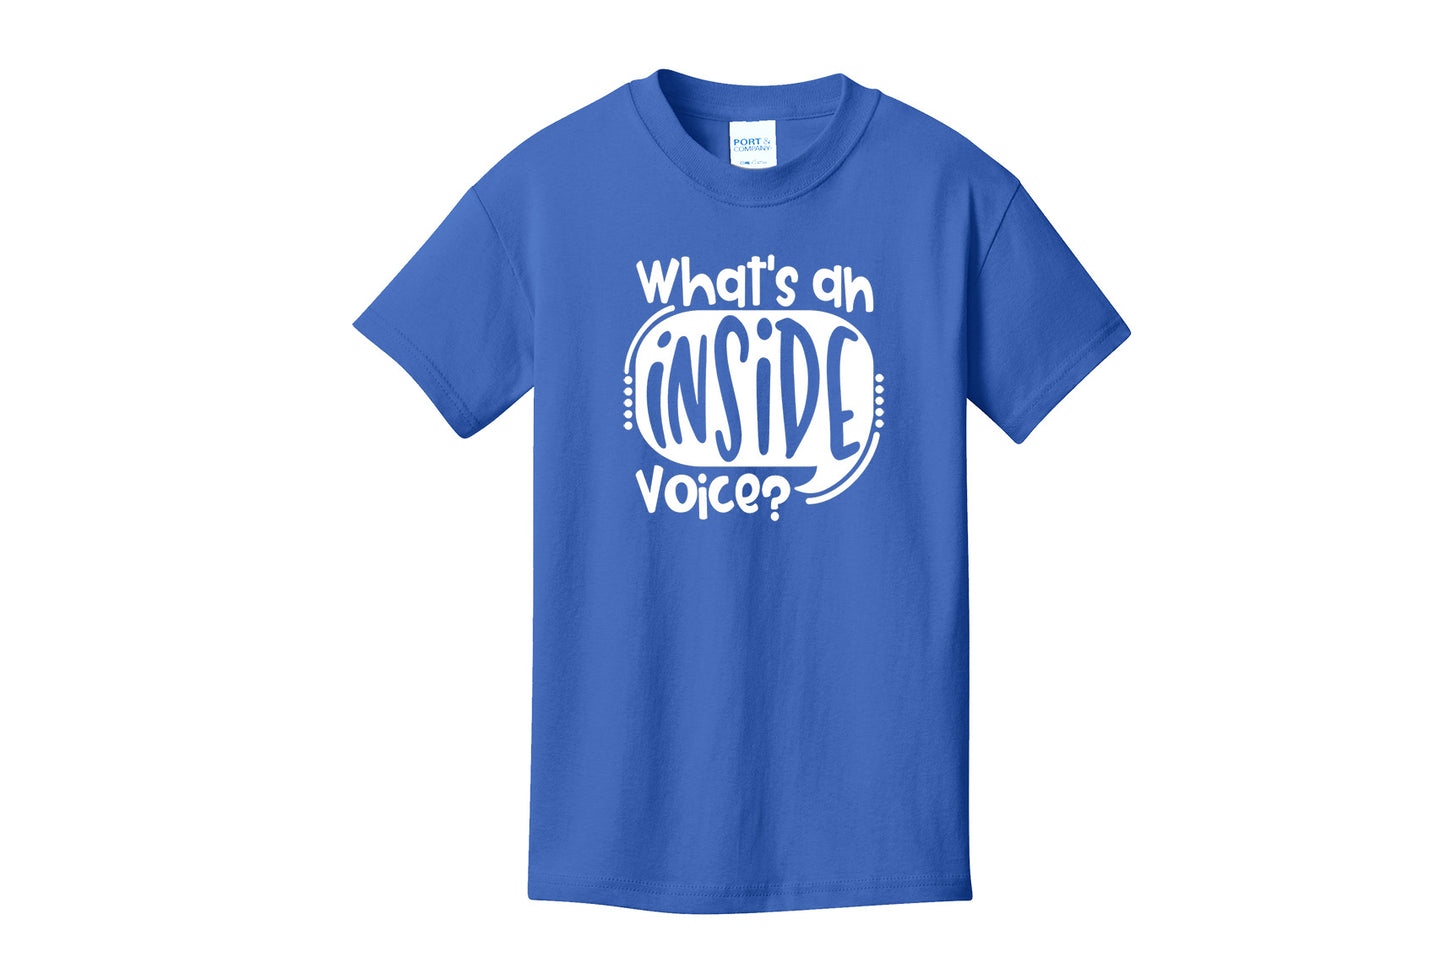 What's An Inside Voice?  Kid's funny T-Shirt, Boys and Girls T-shirts